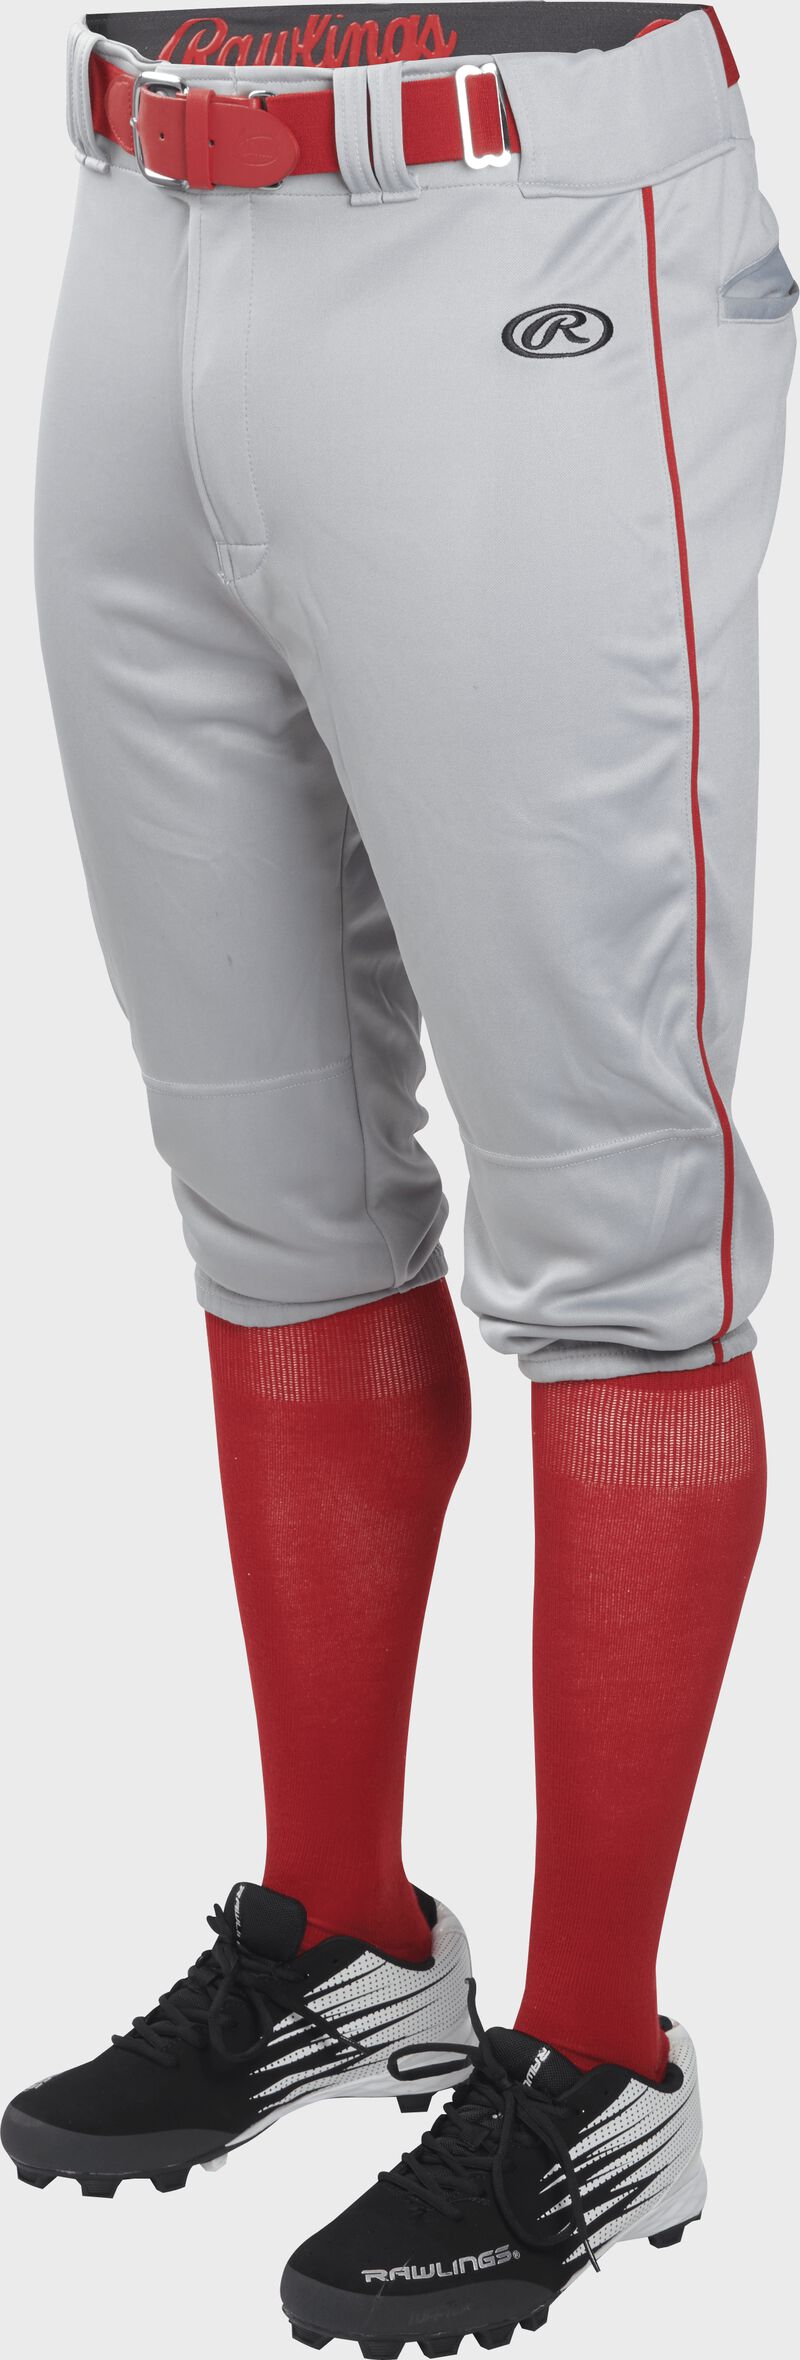 RAWLINGS YOUTH KNICKER LAUNCH PANT WITH PIPING